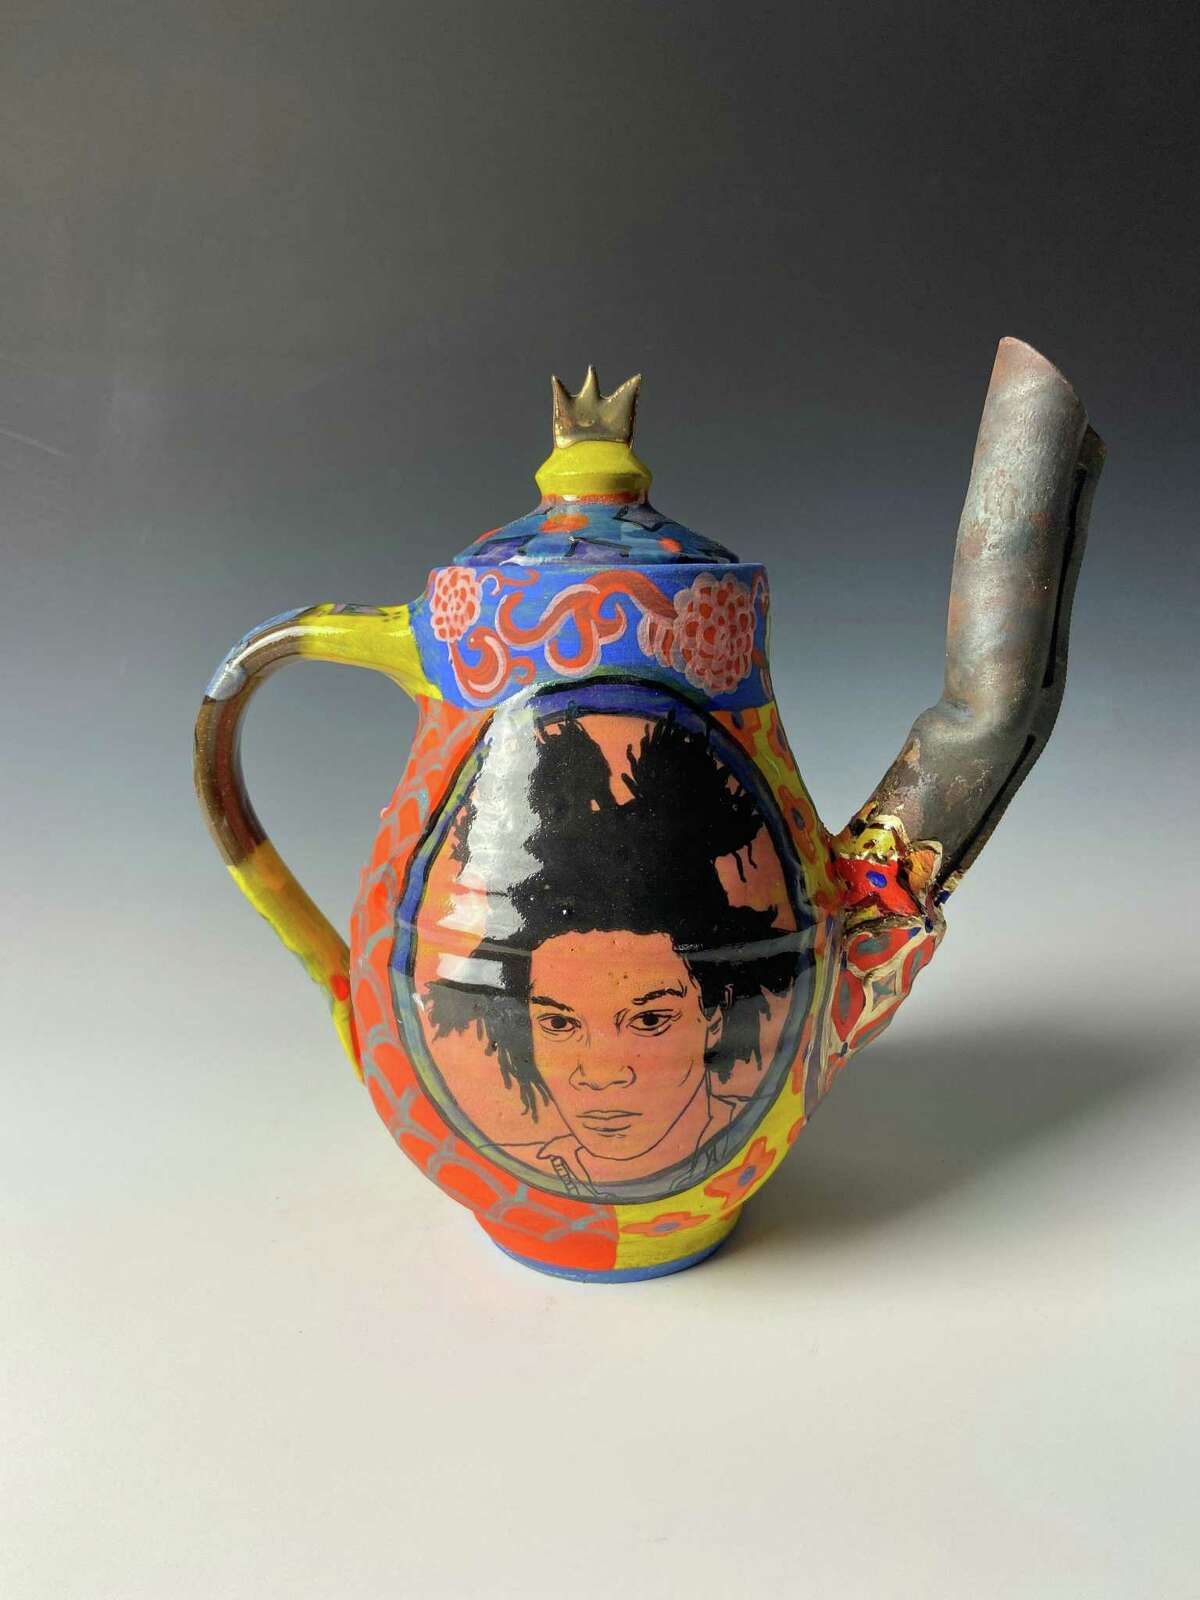 The Fairfield University Art Museum, FUAM, is presenting three displays as part of its fall exhibition series. The exhibitions are: “Carrie Mae Weems: The Usual Suspects,” “Roberto Lugo: New Ceramics,” and “Robert Gerhardt: Mic Check.” The series opened on Saturday, Sept. 18, and is on view through Saturday, Dec. 18. “Roberto Lugo Gun Teapot: Ida B. Wells and Jean-Michel Basquiat, 2021, glazed ceramic, luster, steel, epoxy, enamel,” is shown.